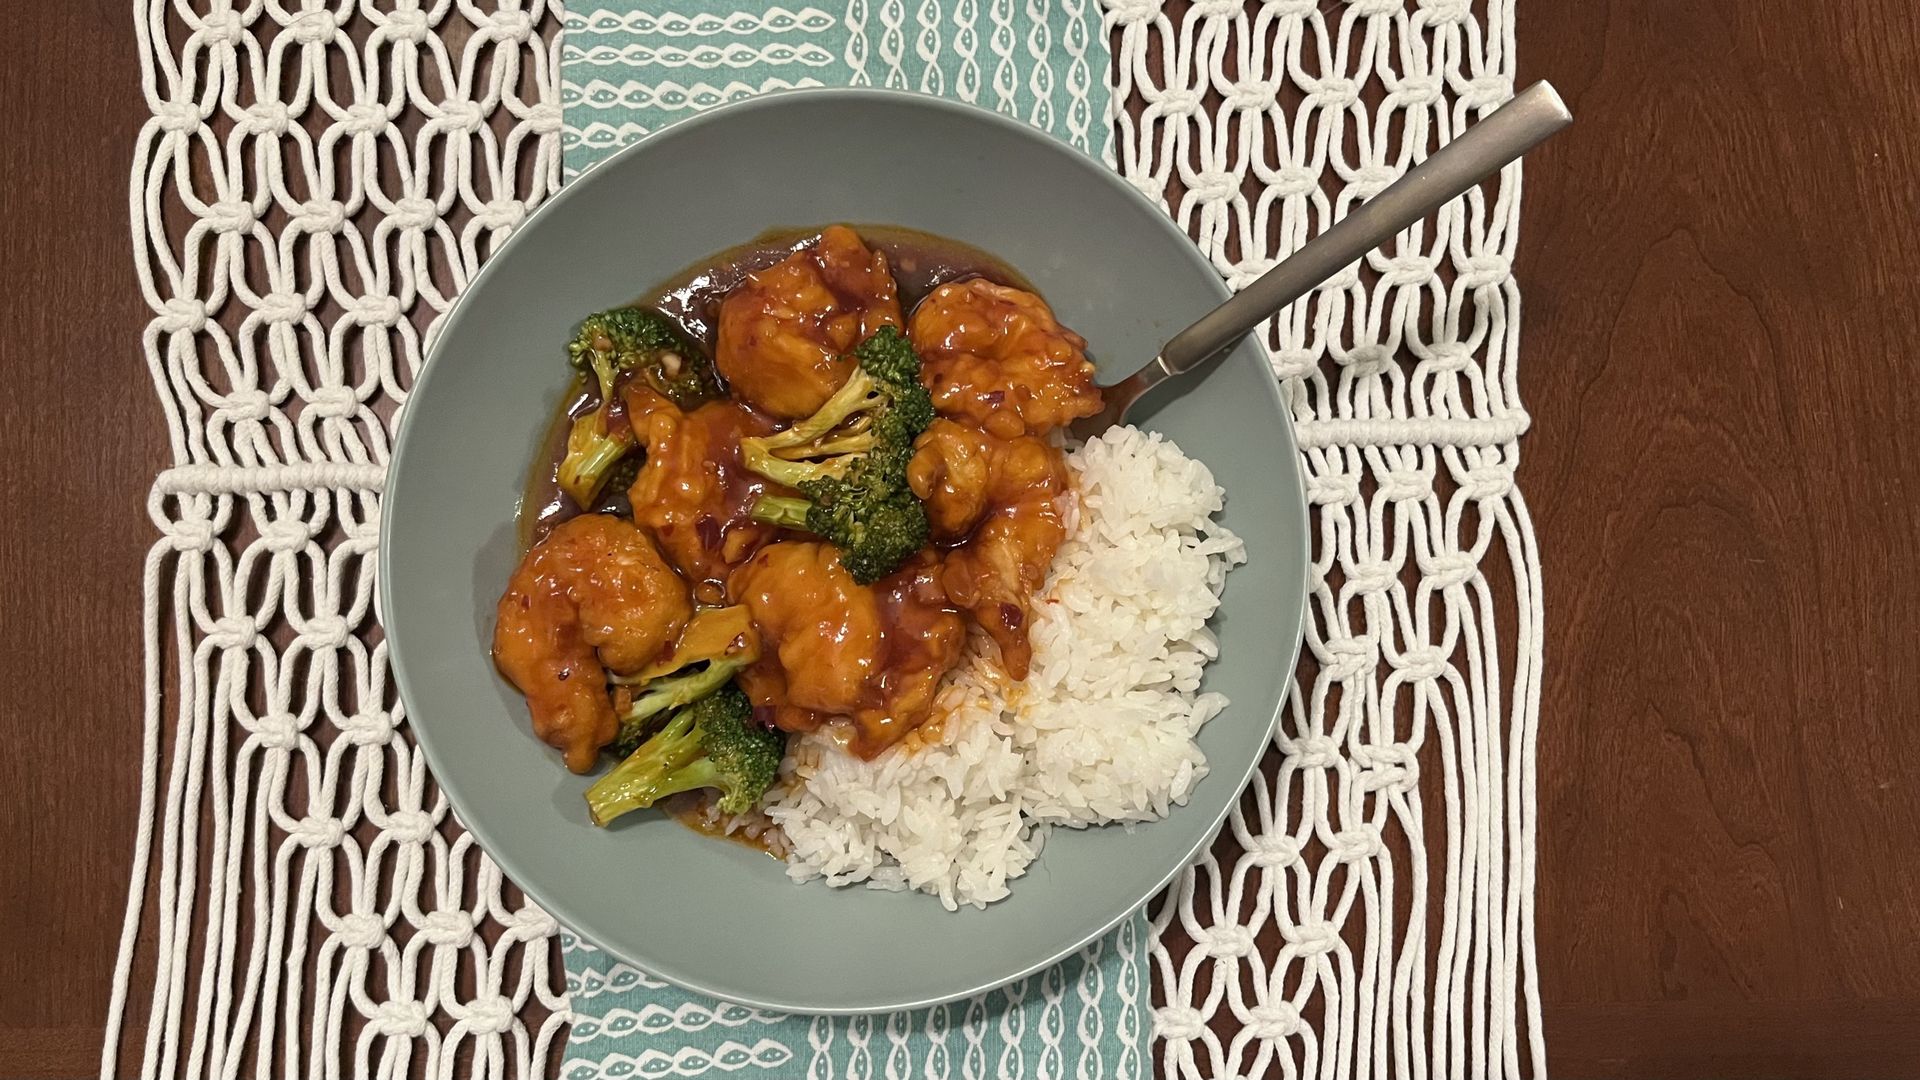 Shrimp, broccoli and rice in a blue bowl on a table